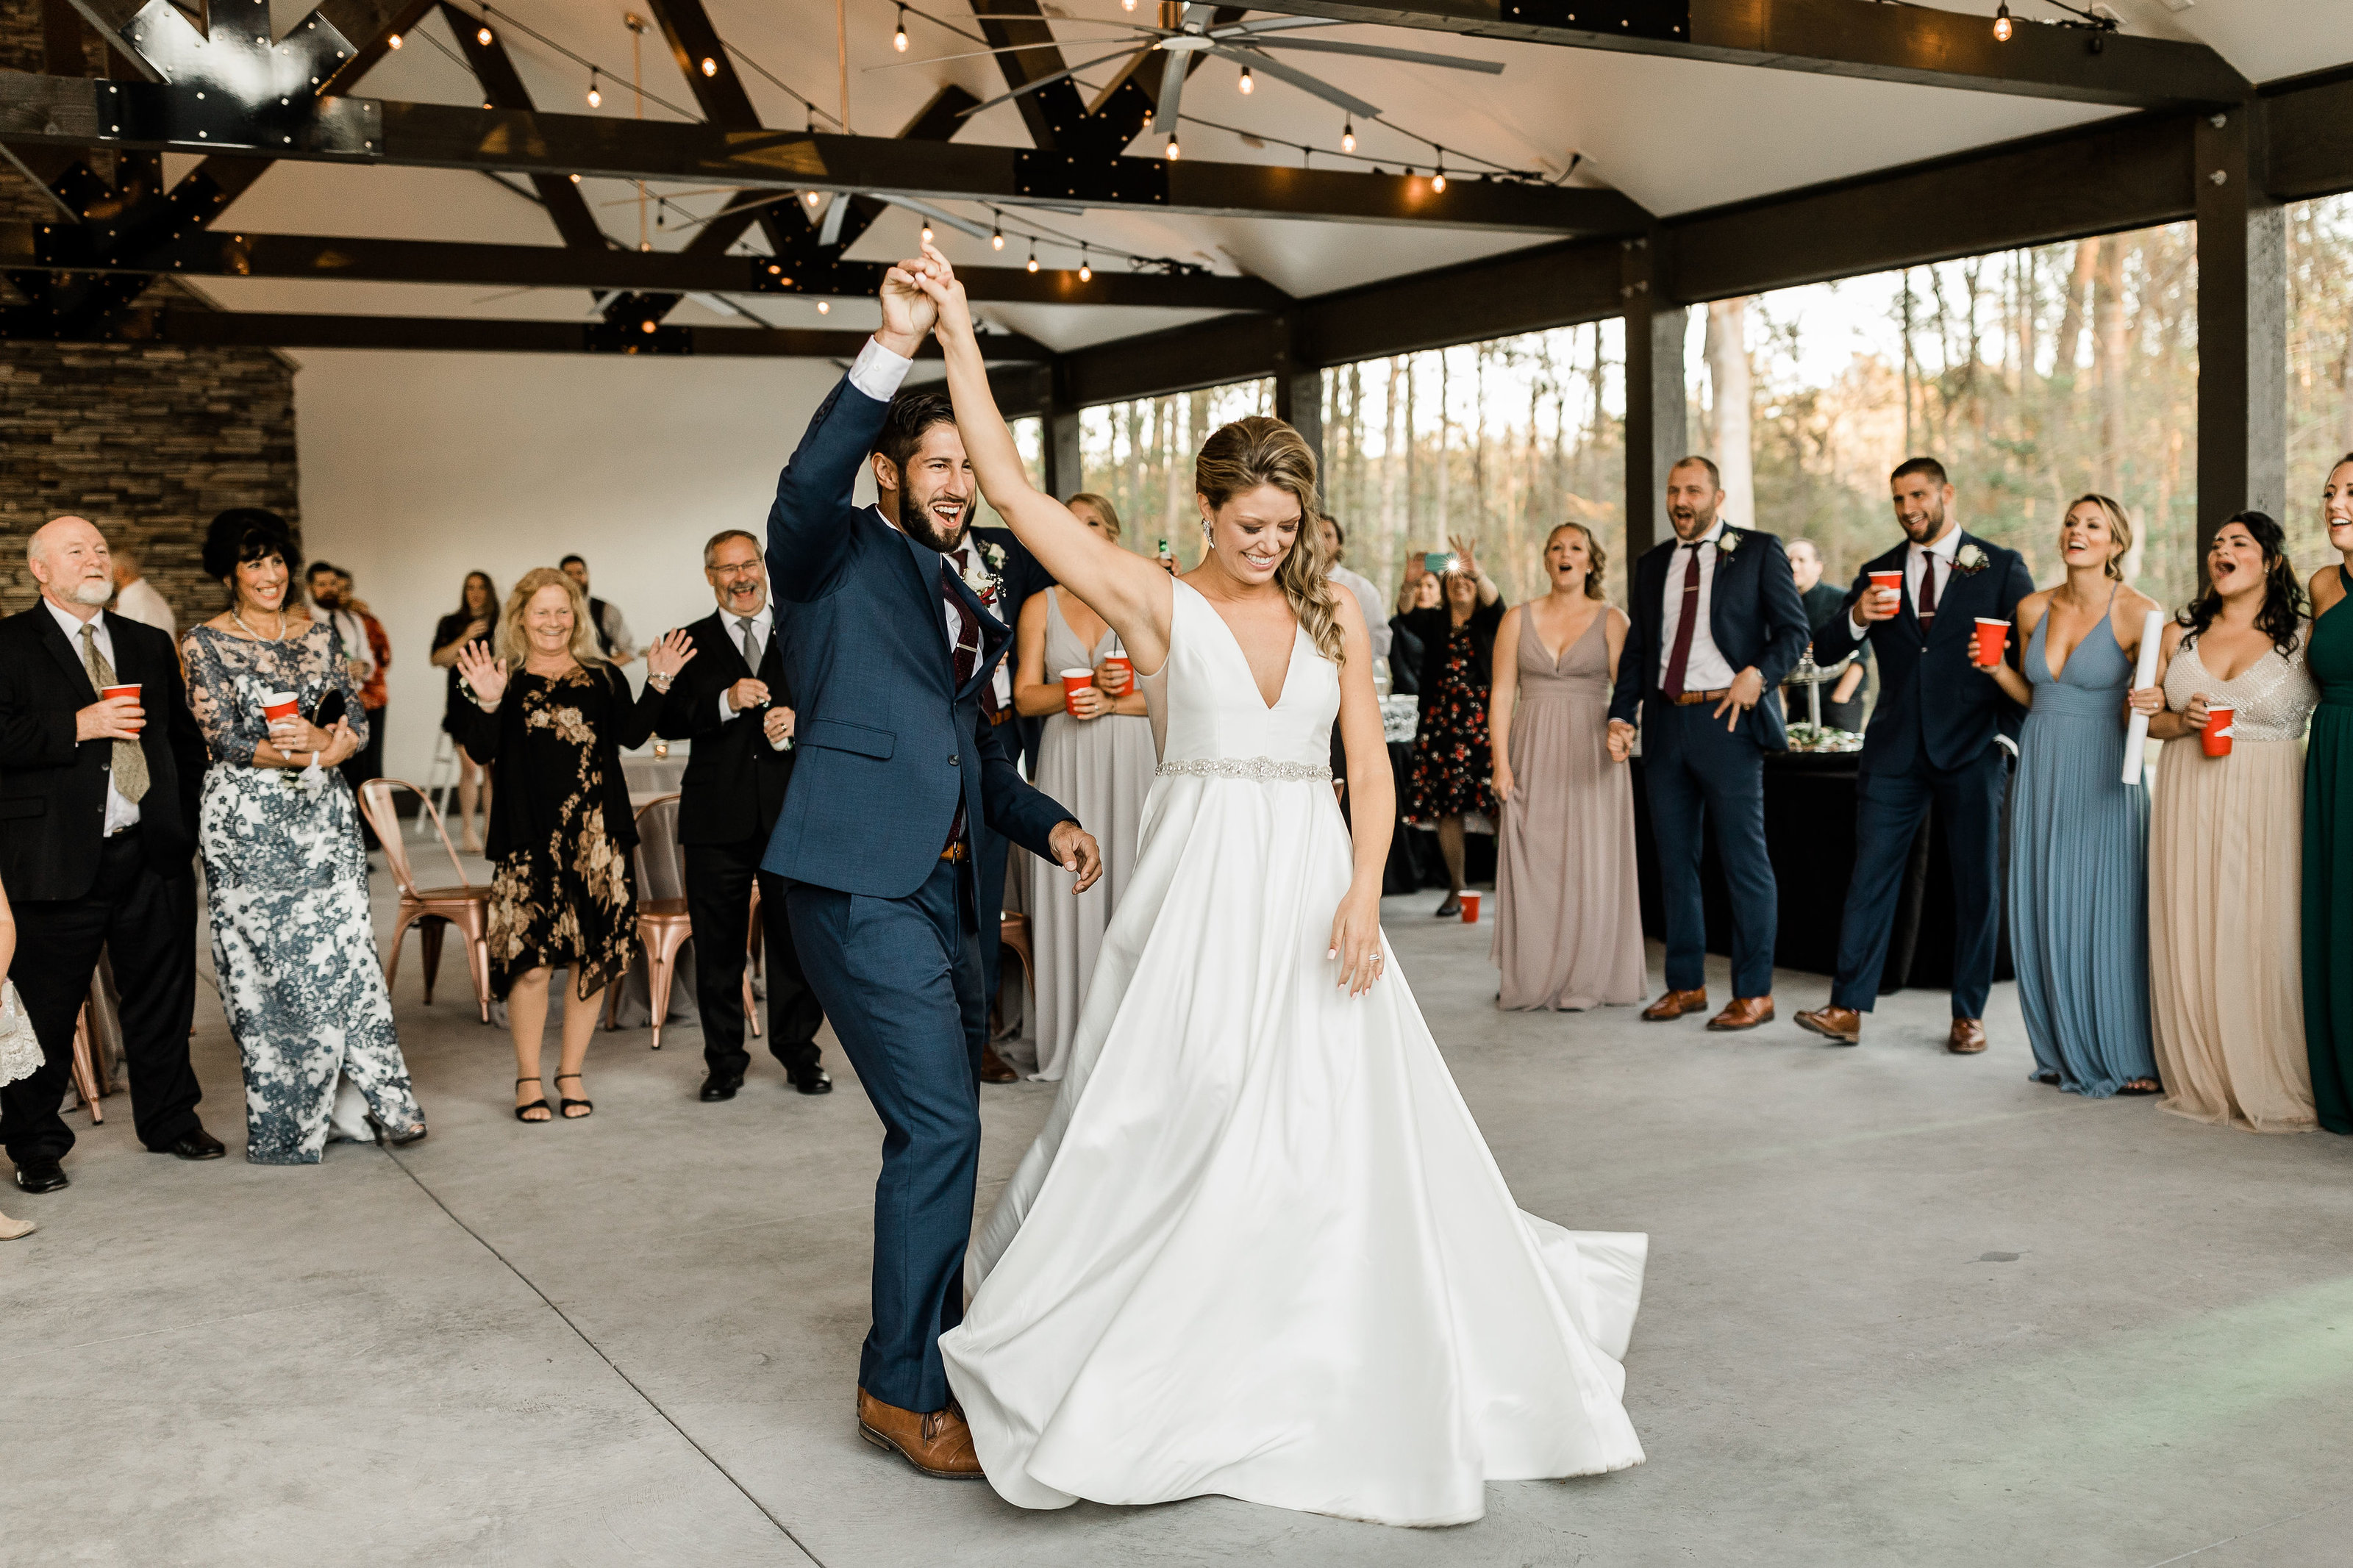 An amazing moment of a newly wed couple's first dance